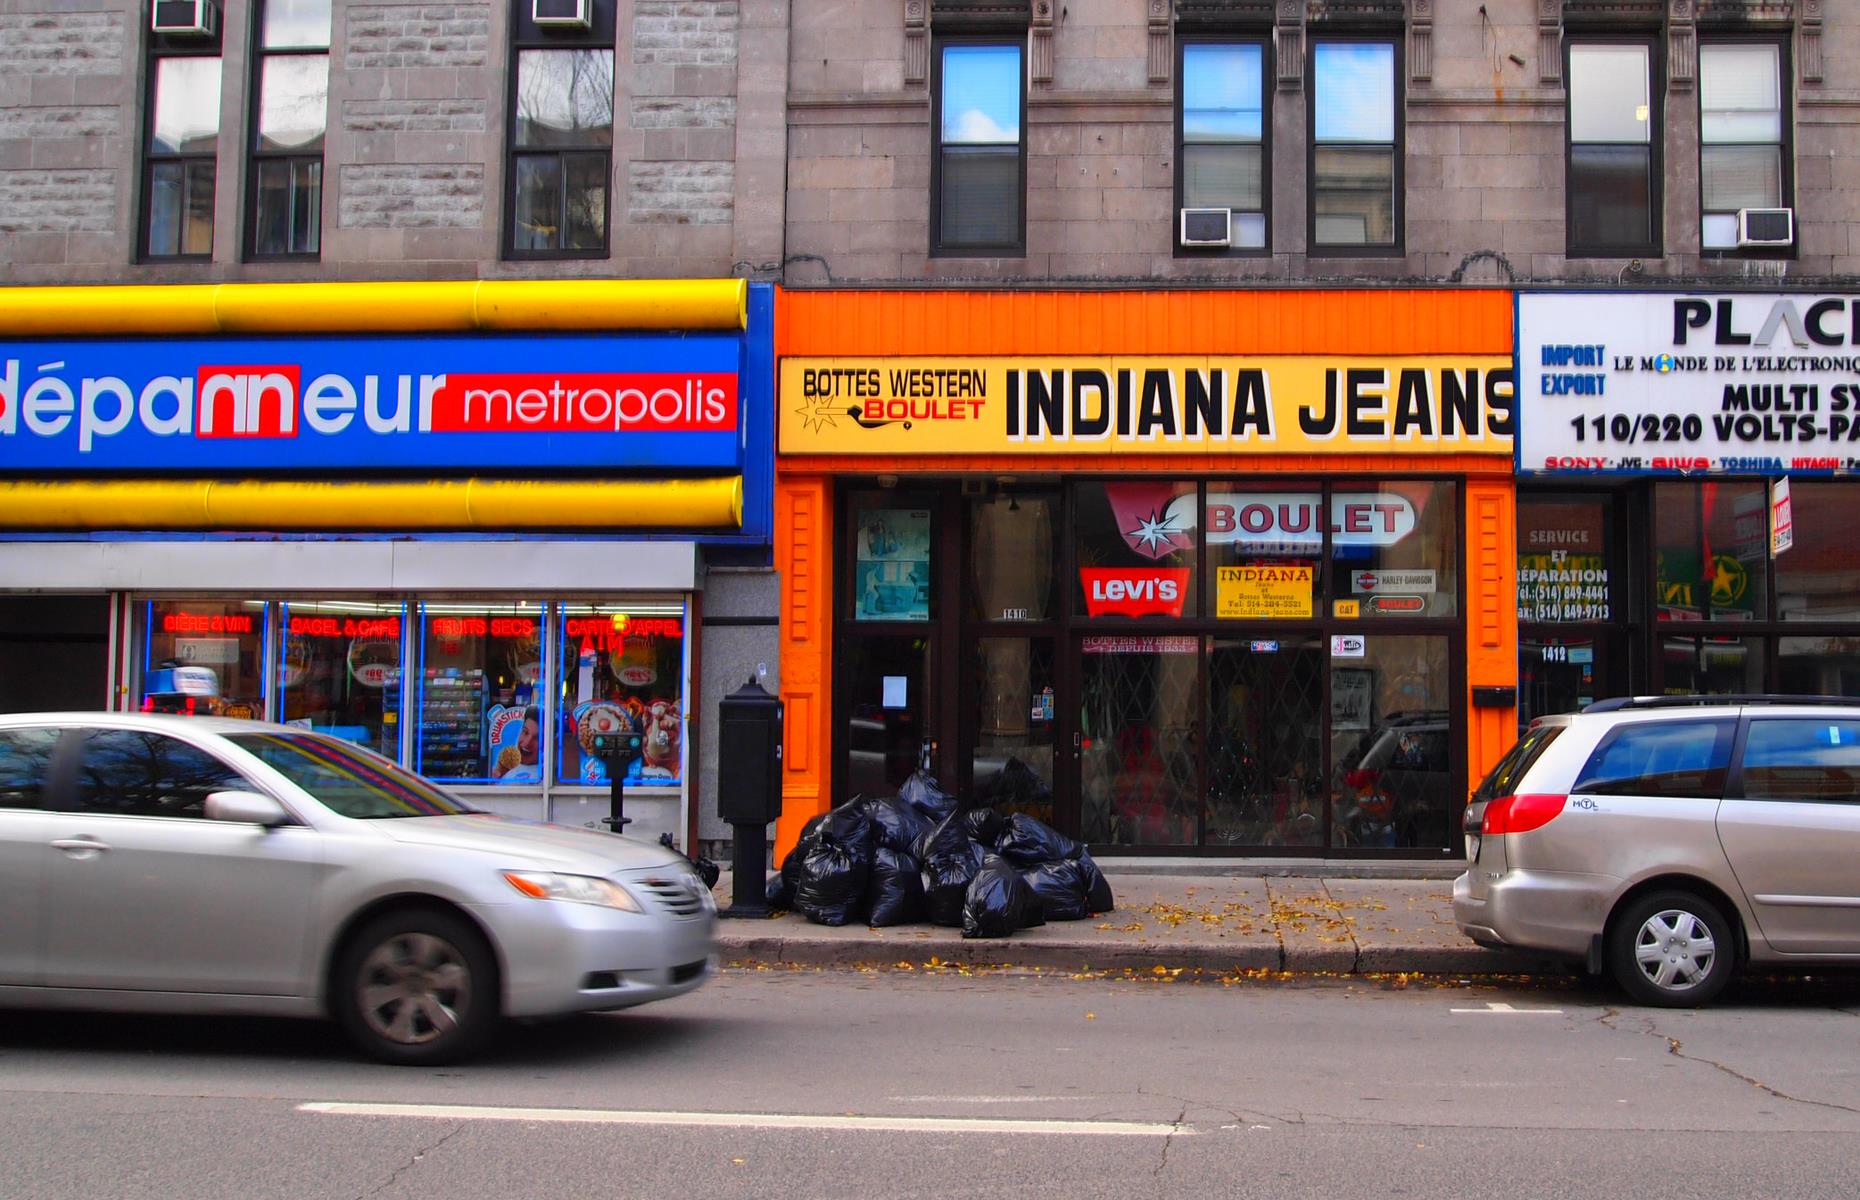 Indiana Jeans, Montreal, Canada